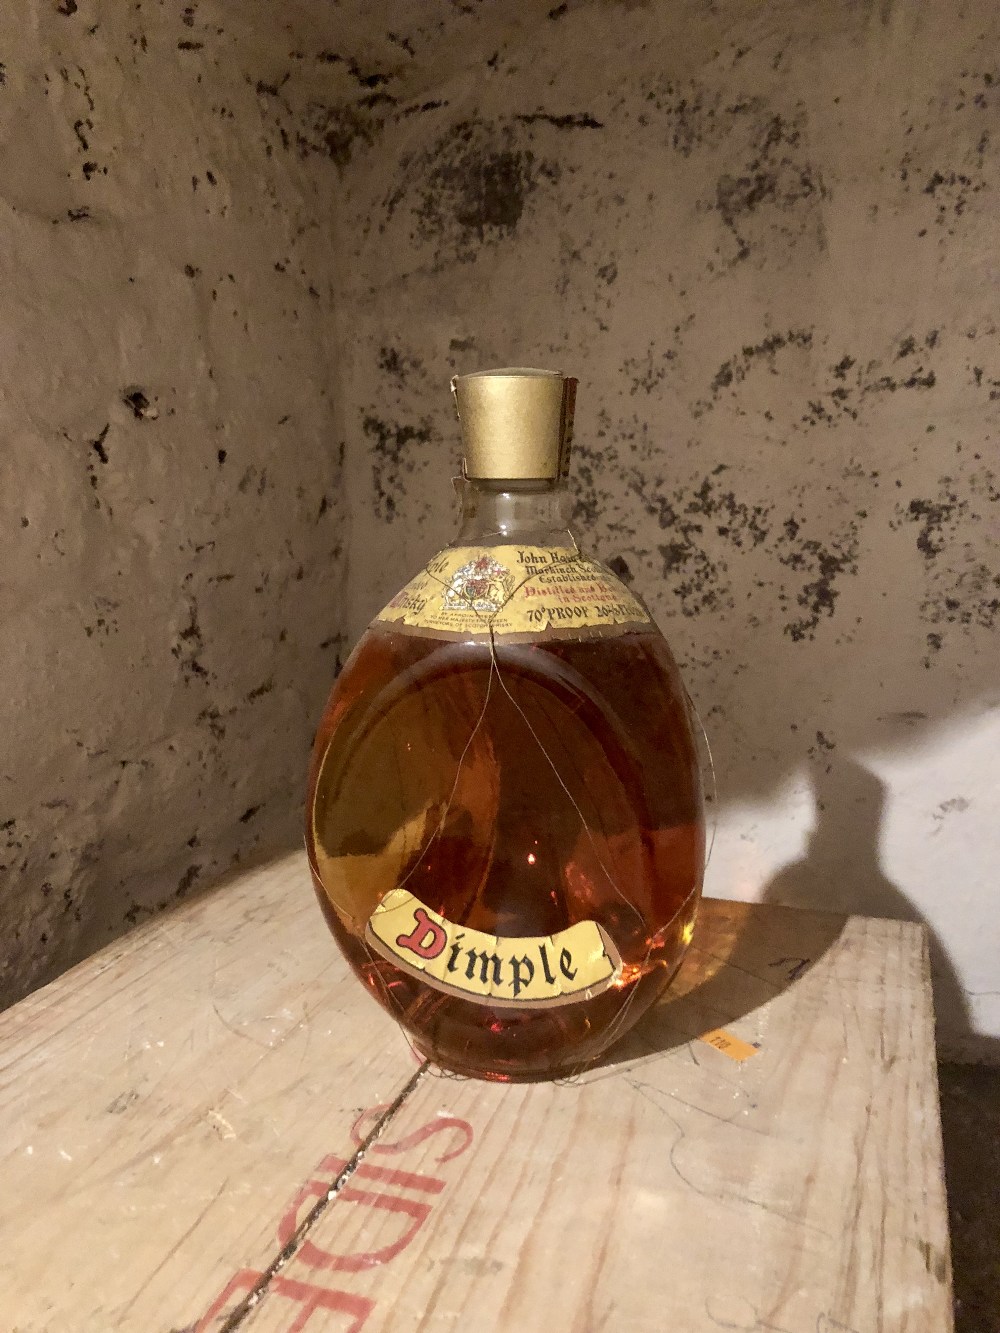 Whiskey: a Dimple Haig Scotch Whiskey 30+ years old.